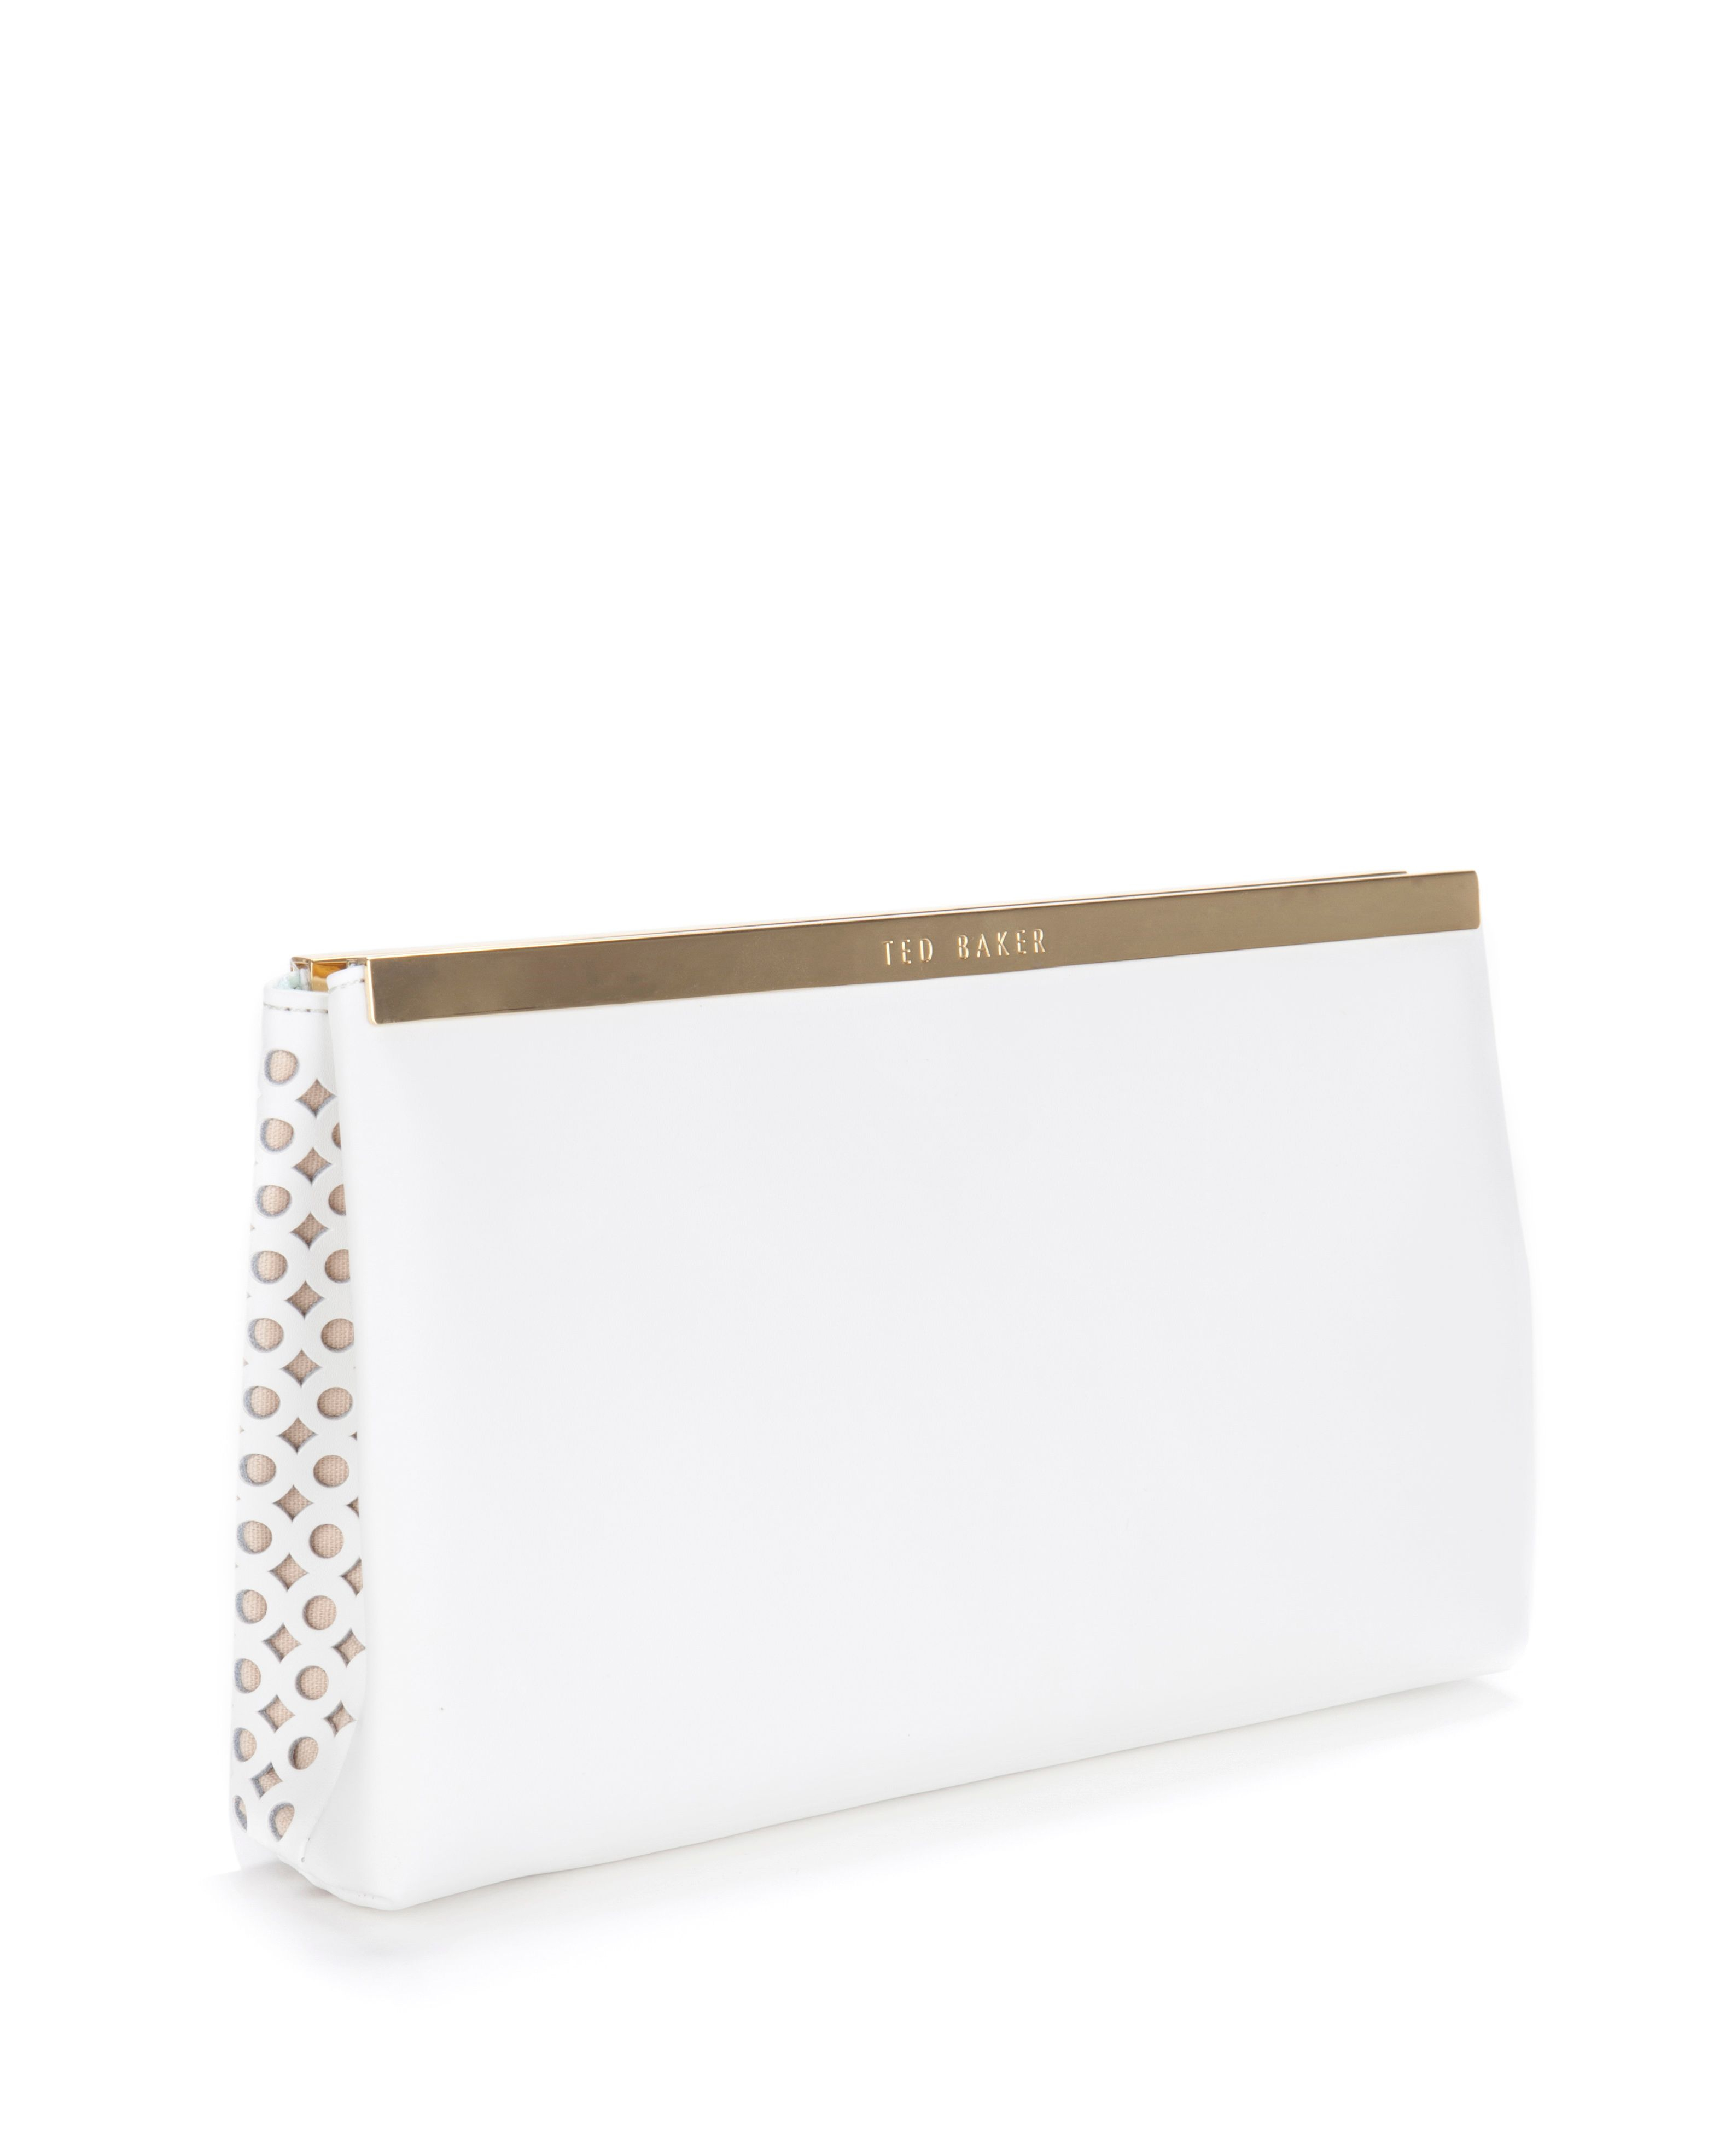 Ted baker Kala Cut Out Leather Clutch Bag in White | Lyst